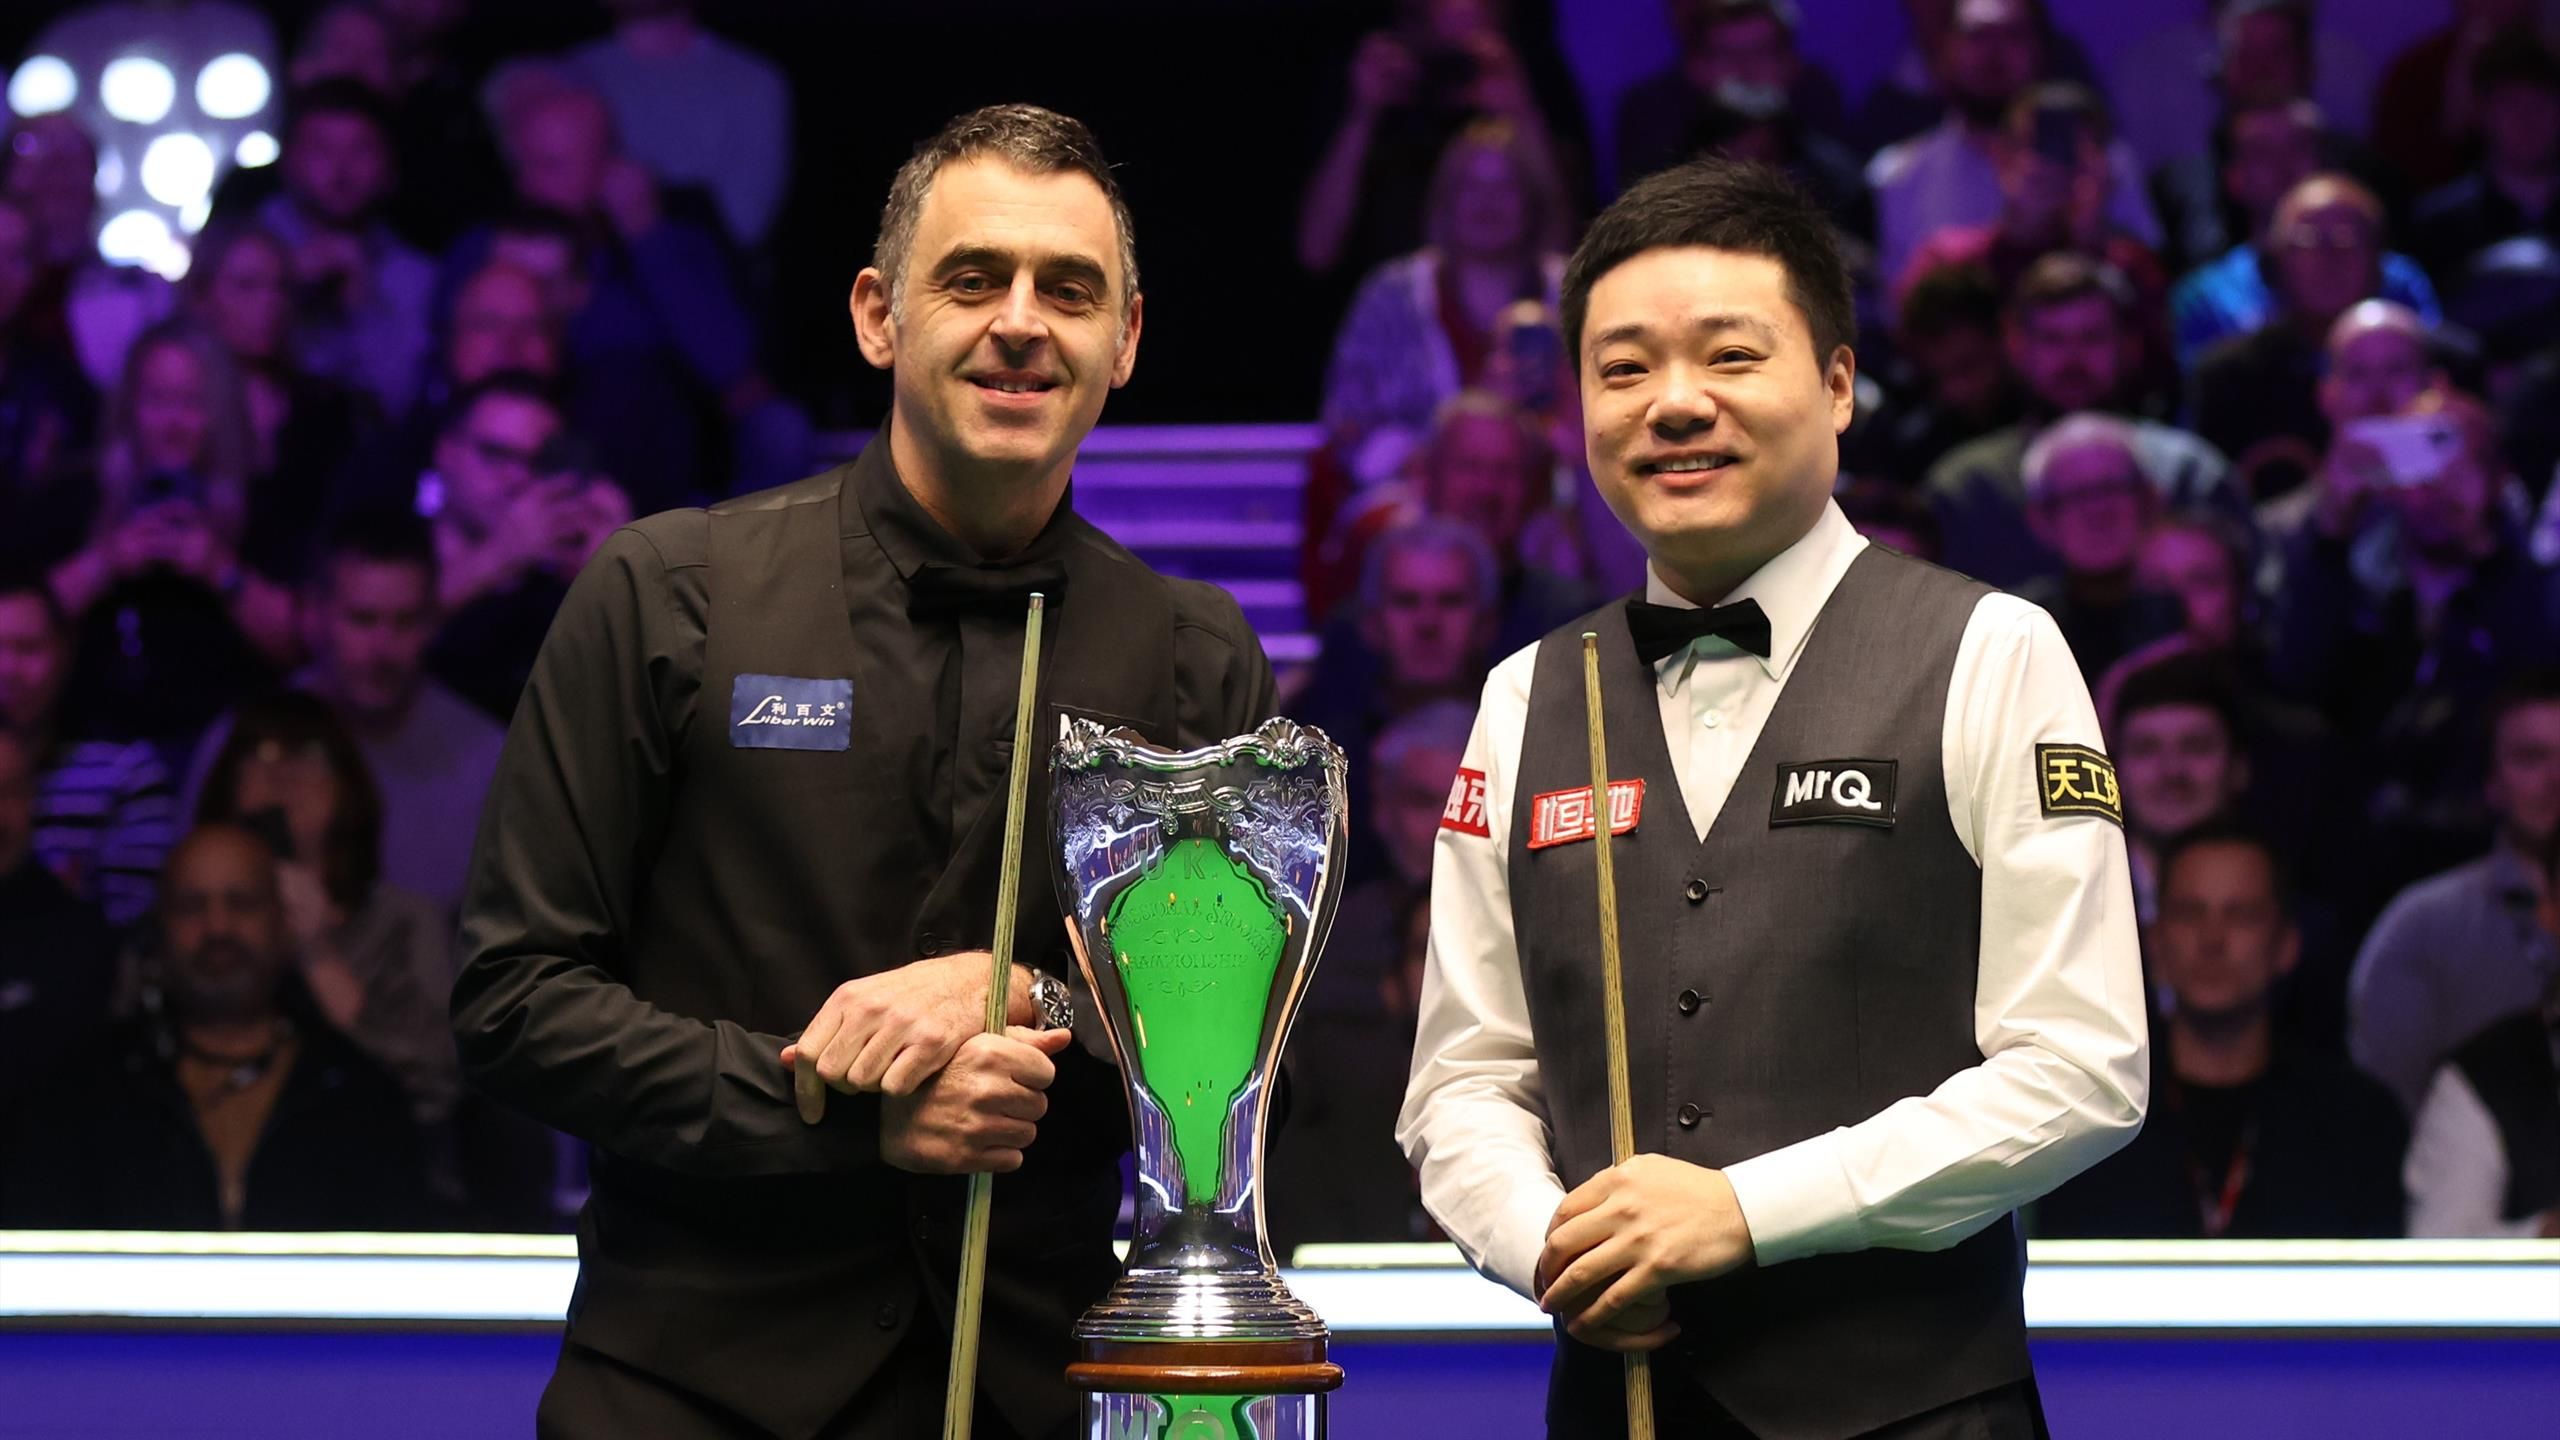 World Championship Game 4: Ding strikes back, levels the score